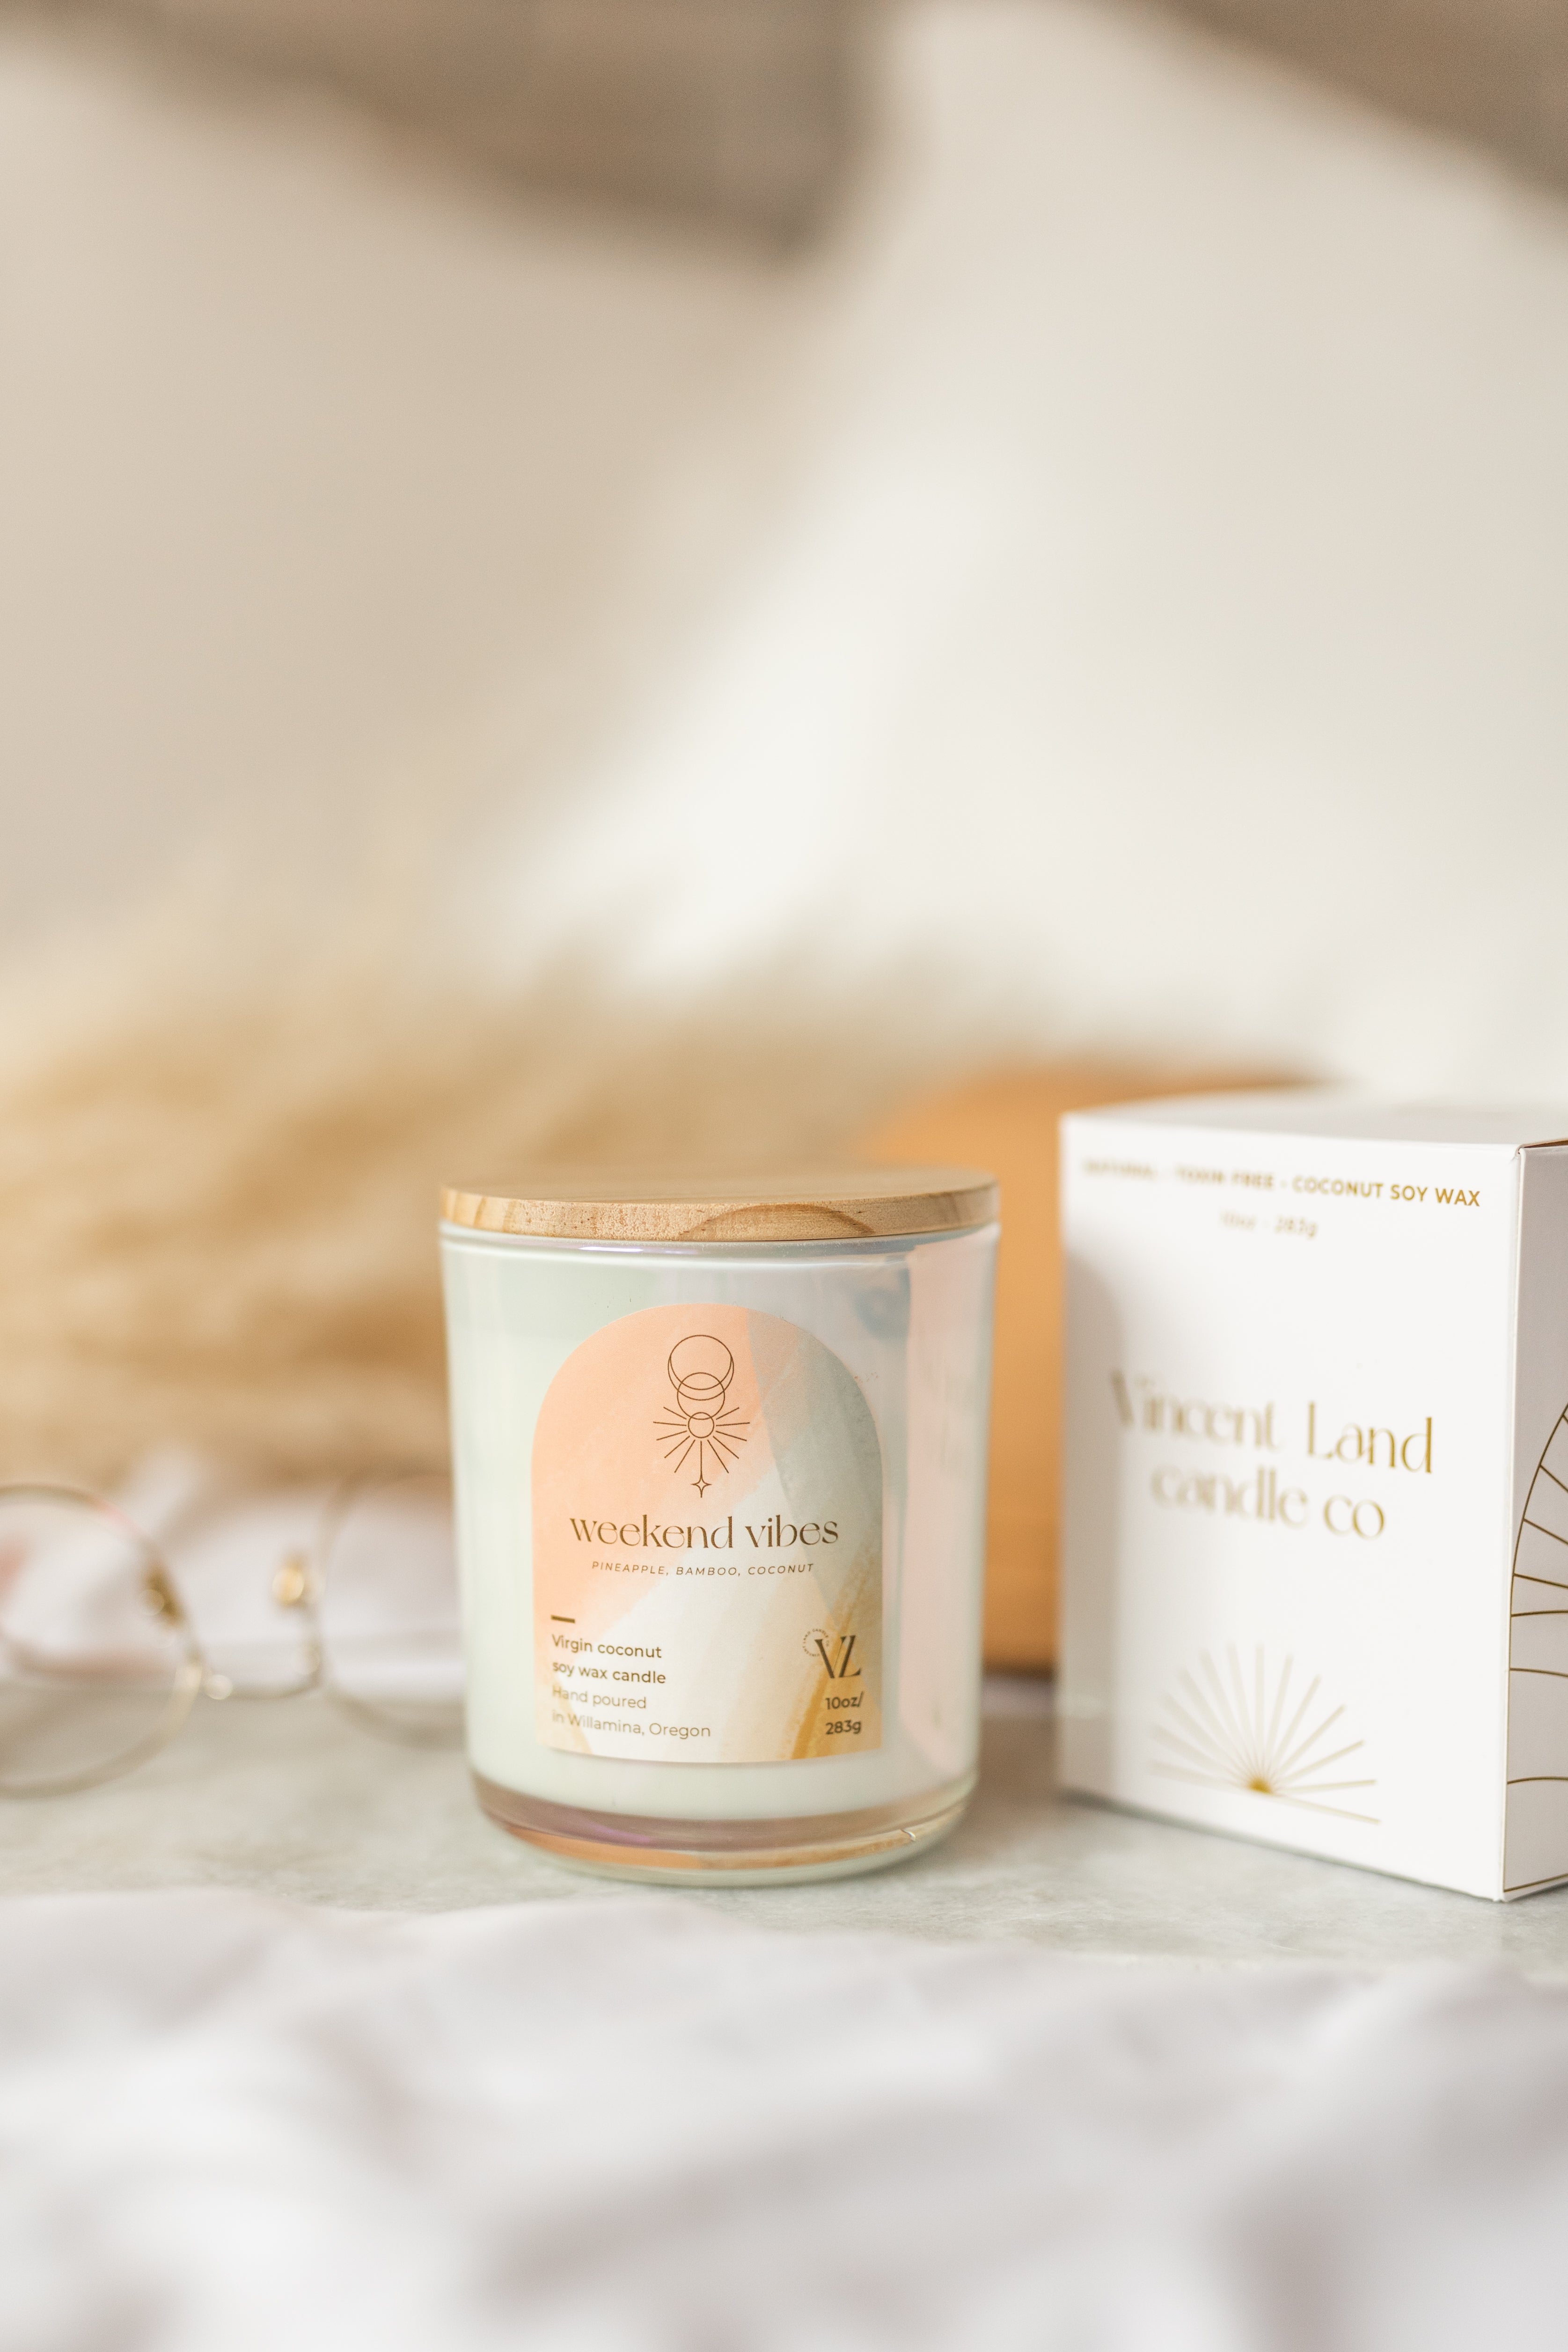 Weekend vibes coconut soy  wax candle | Pineapple, bamboo, coconut - Vincent Land Candle Co.